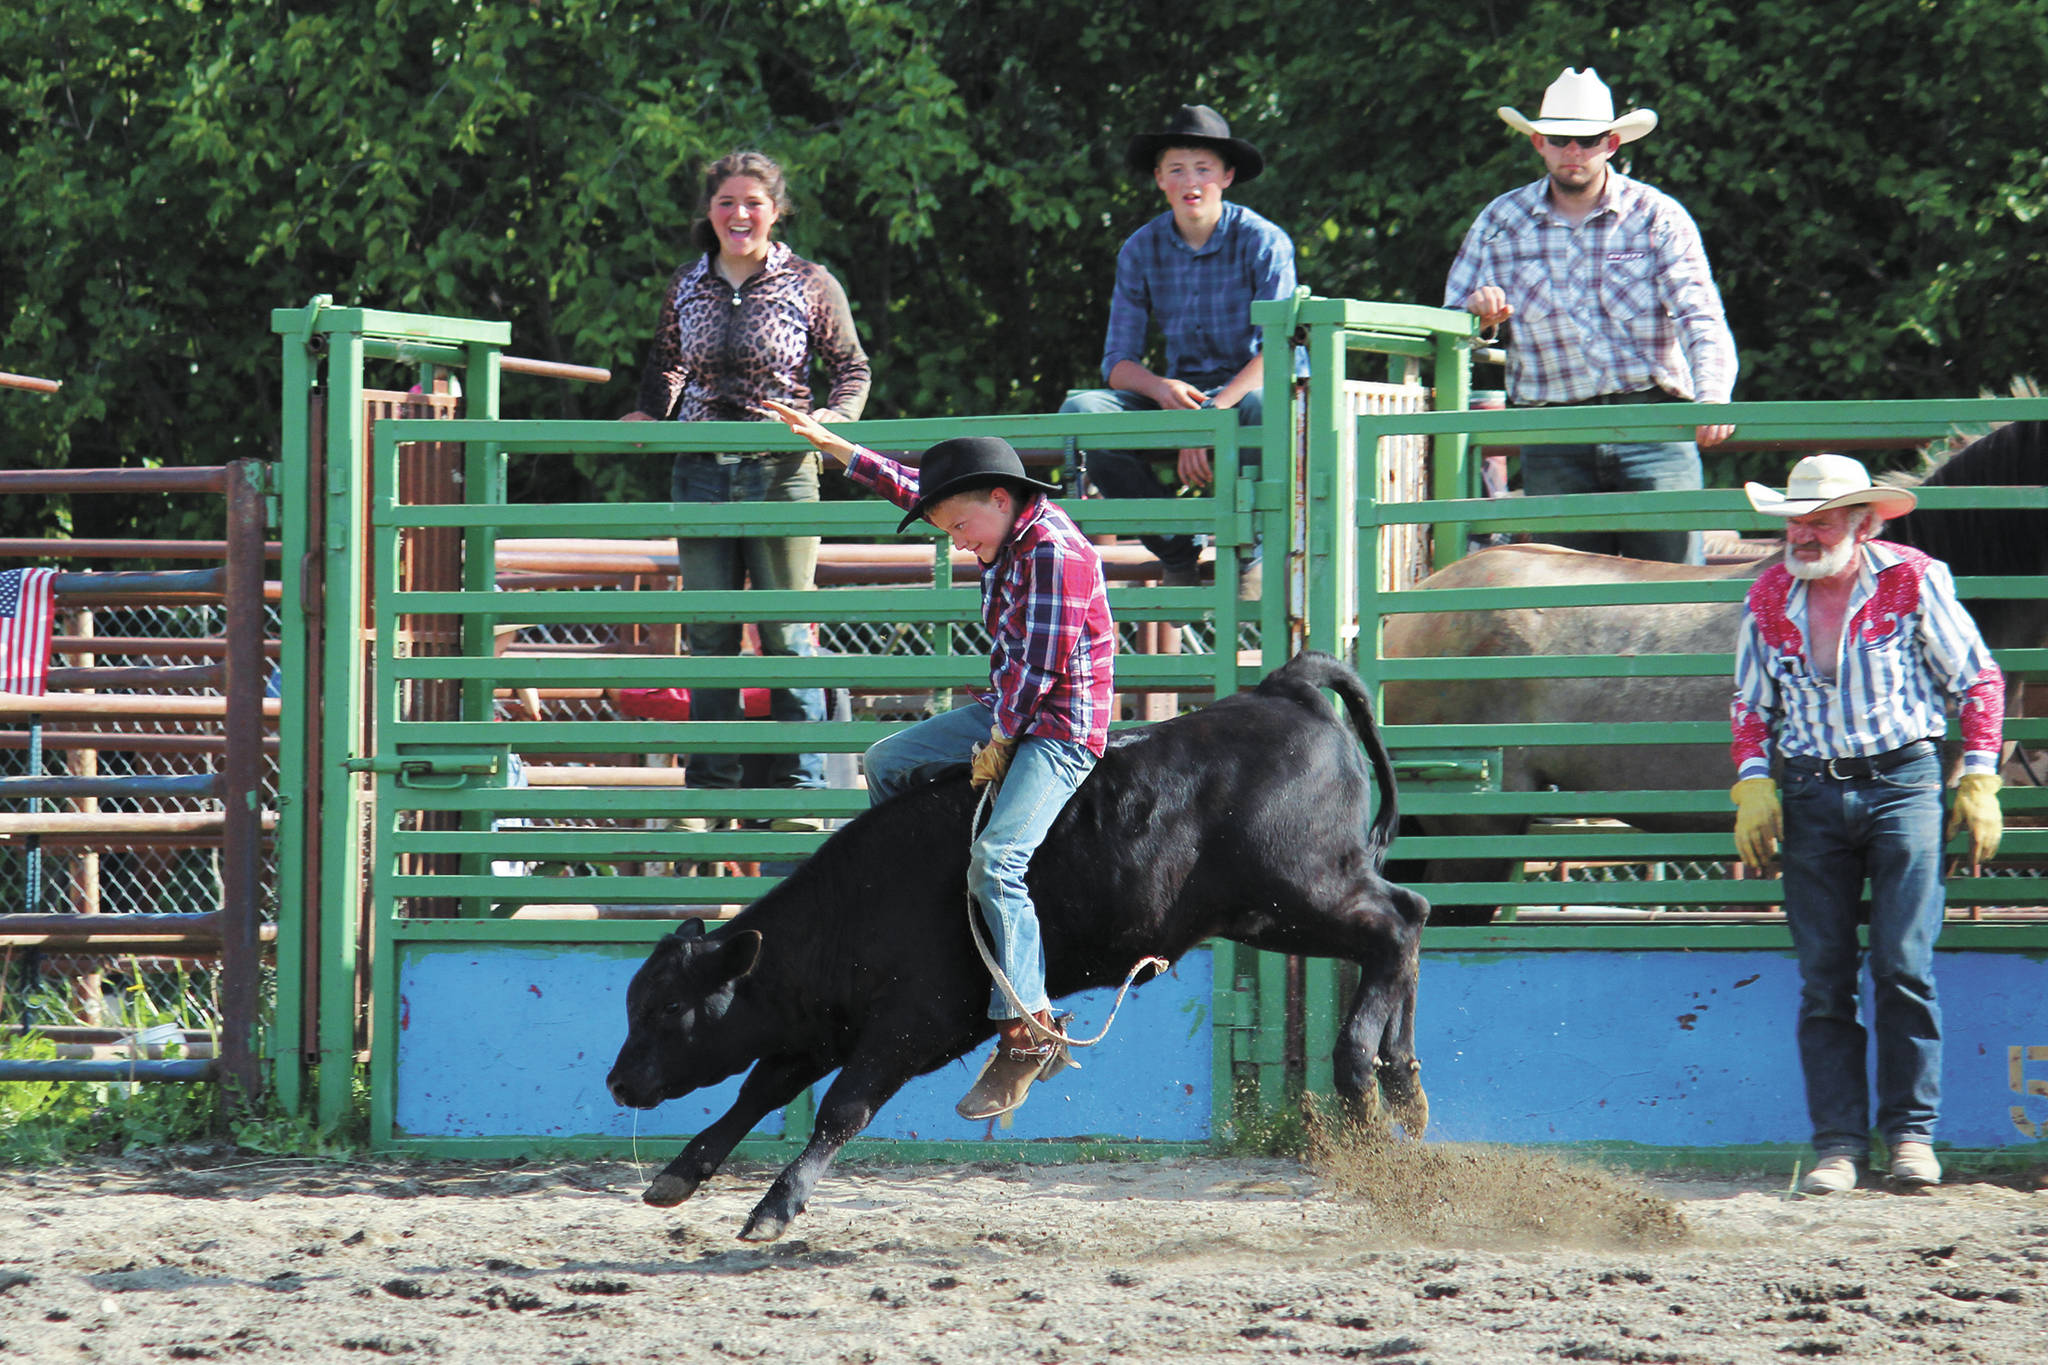 Ninilchik Rodeo returns to its roots over July Fourth weekend